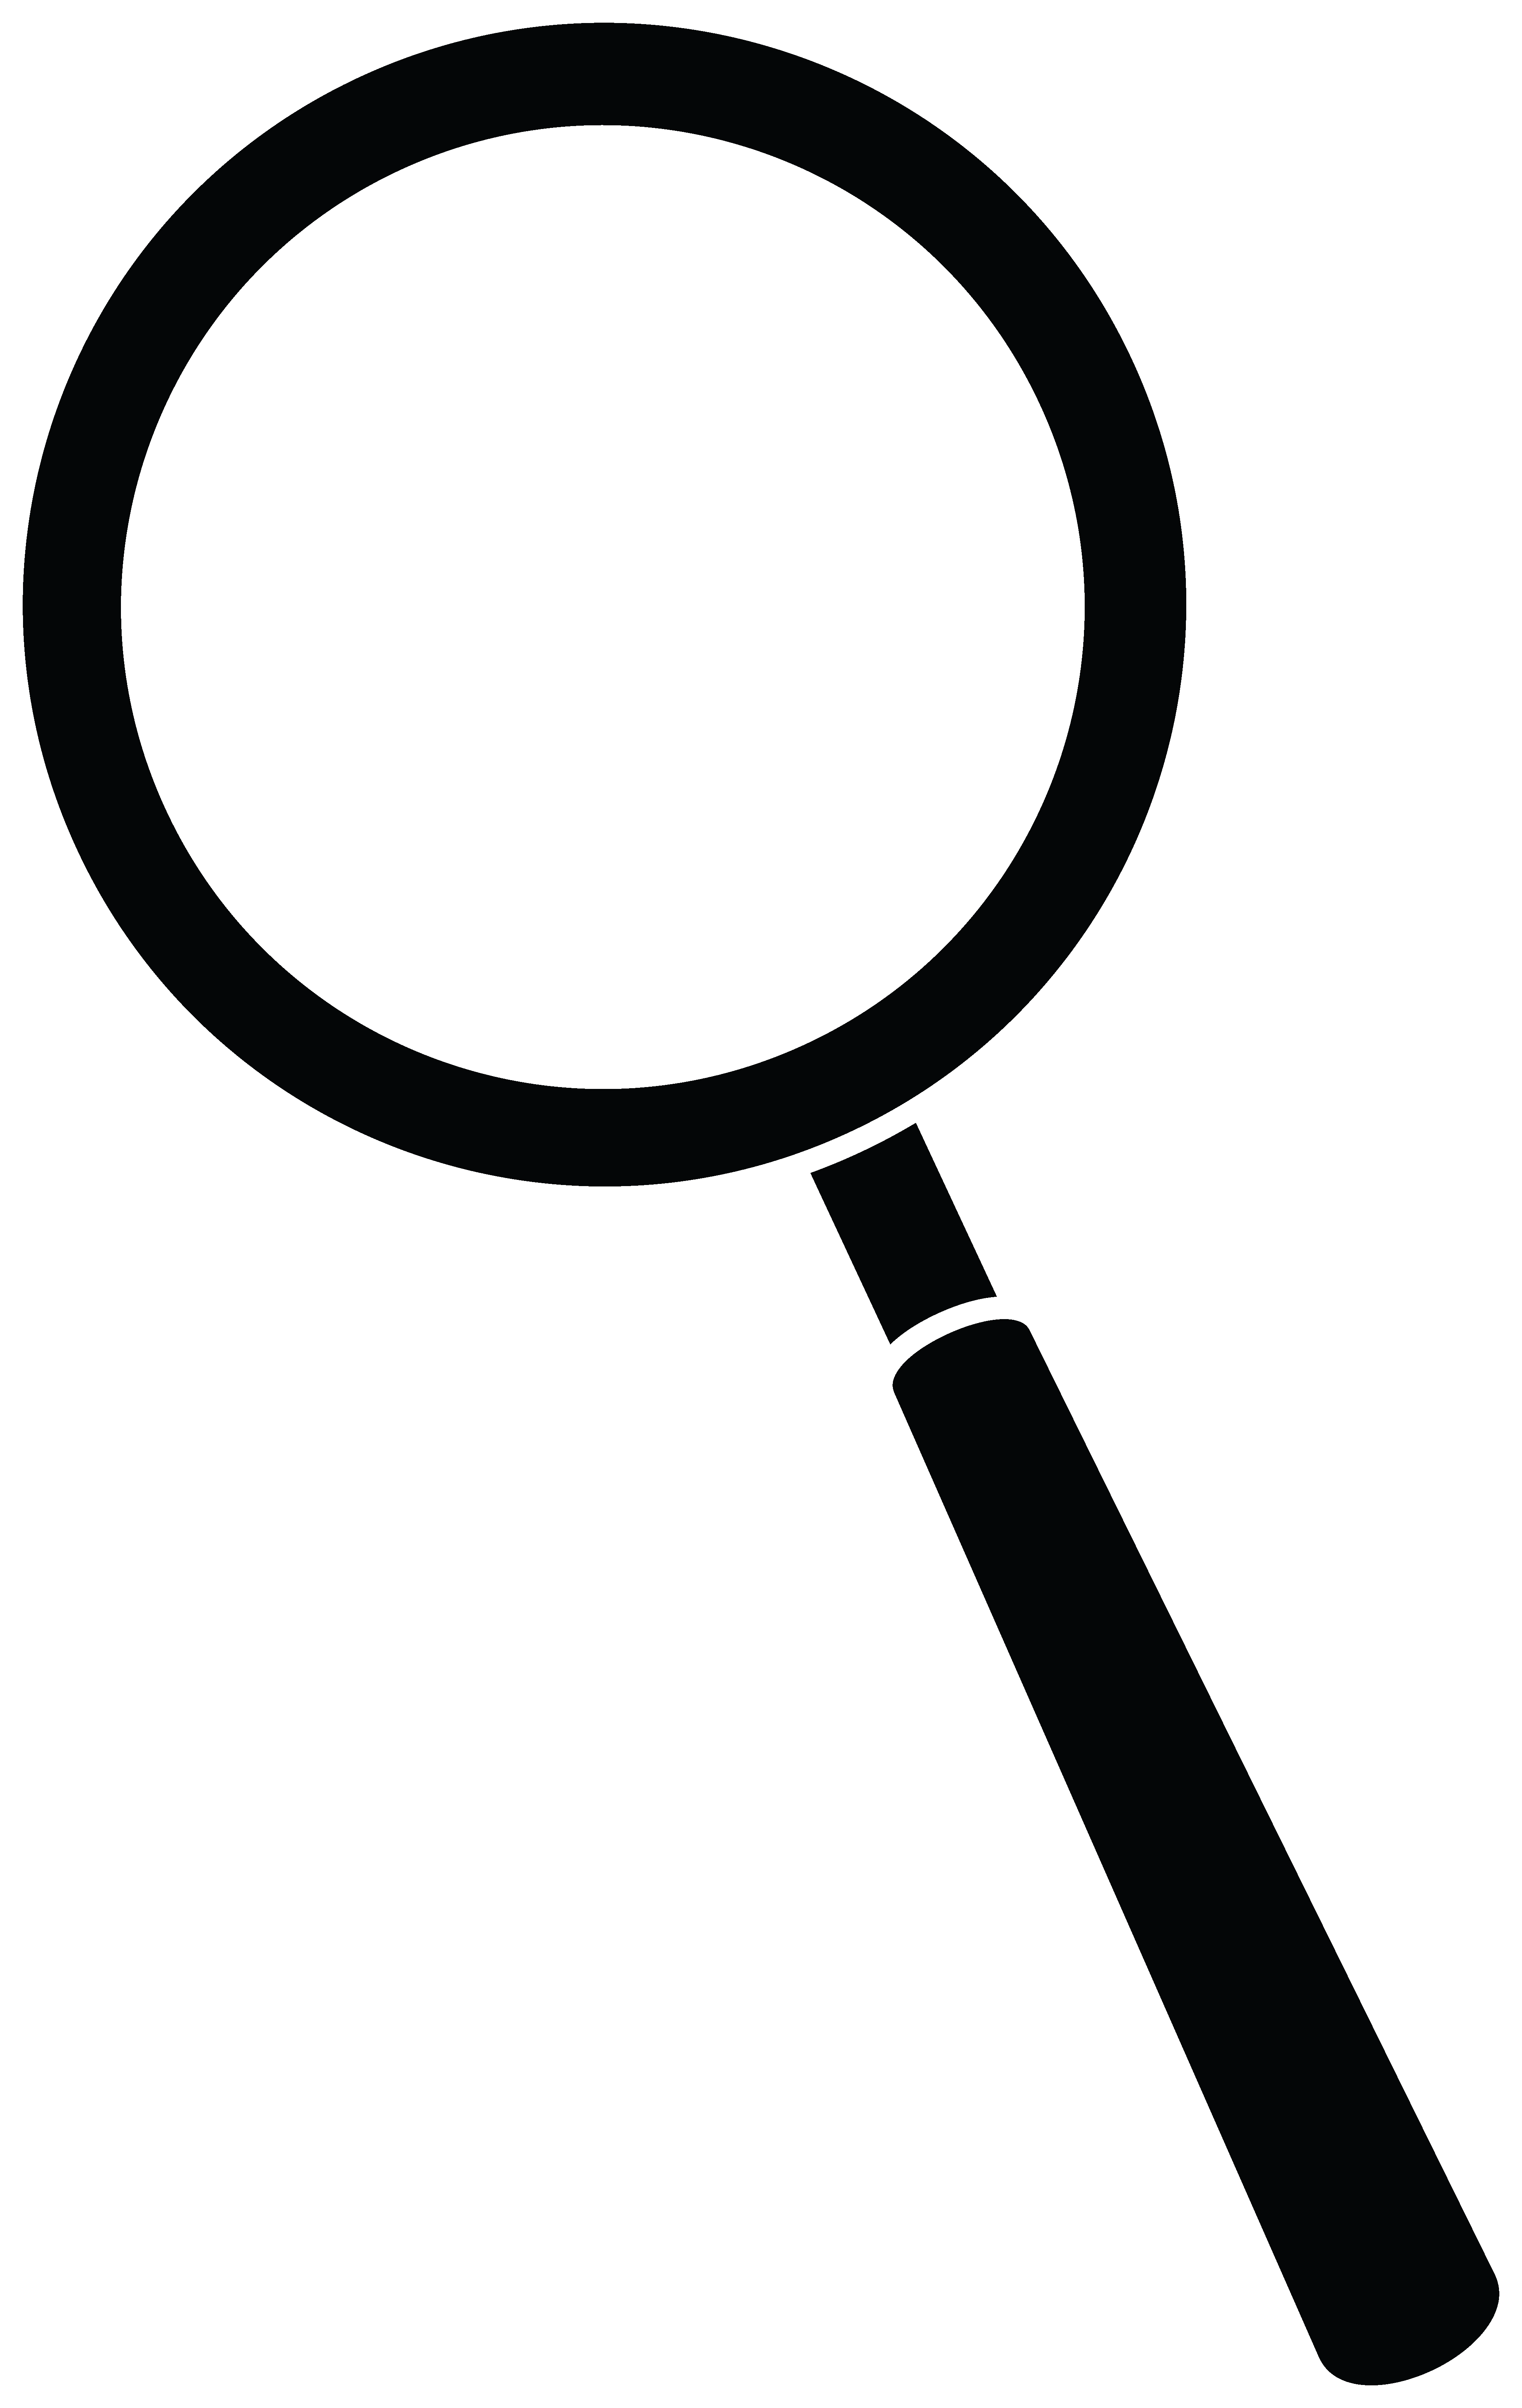 Black and white magnifying glass clipart